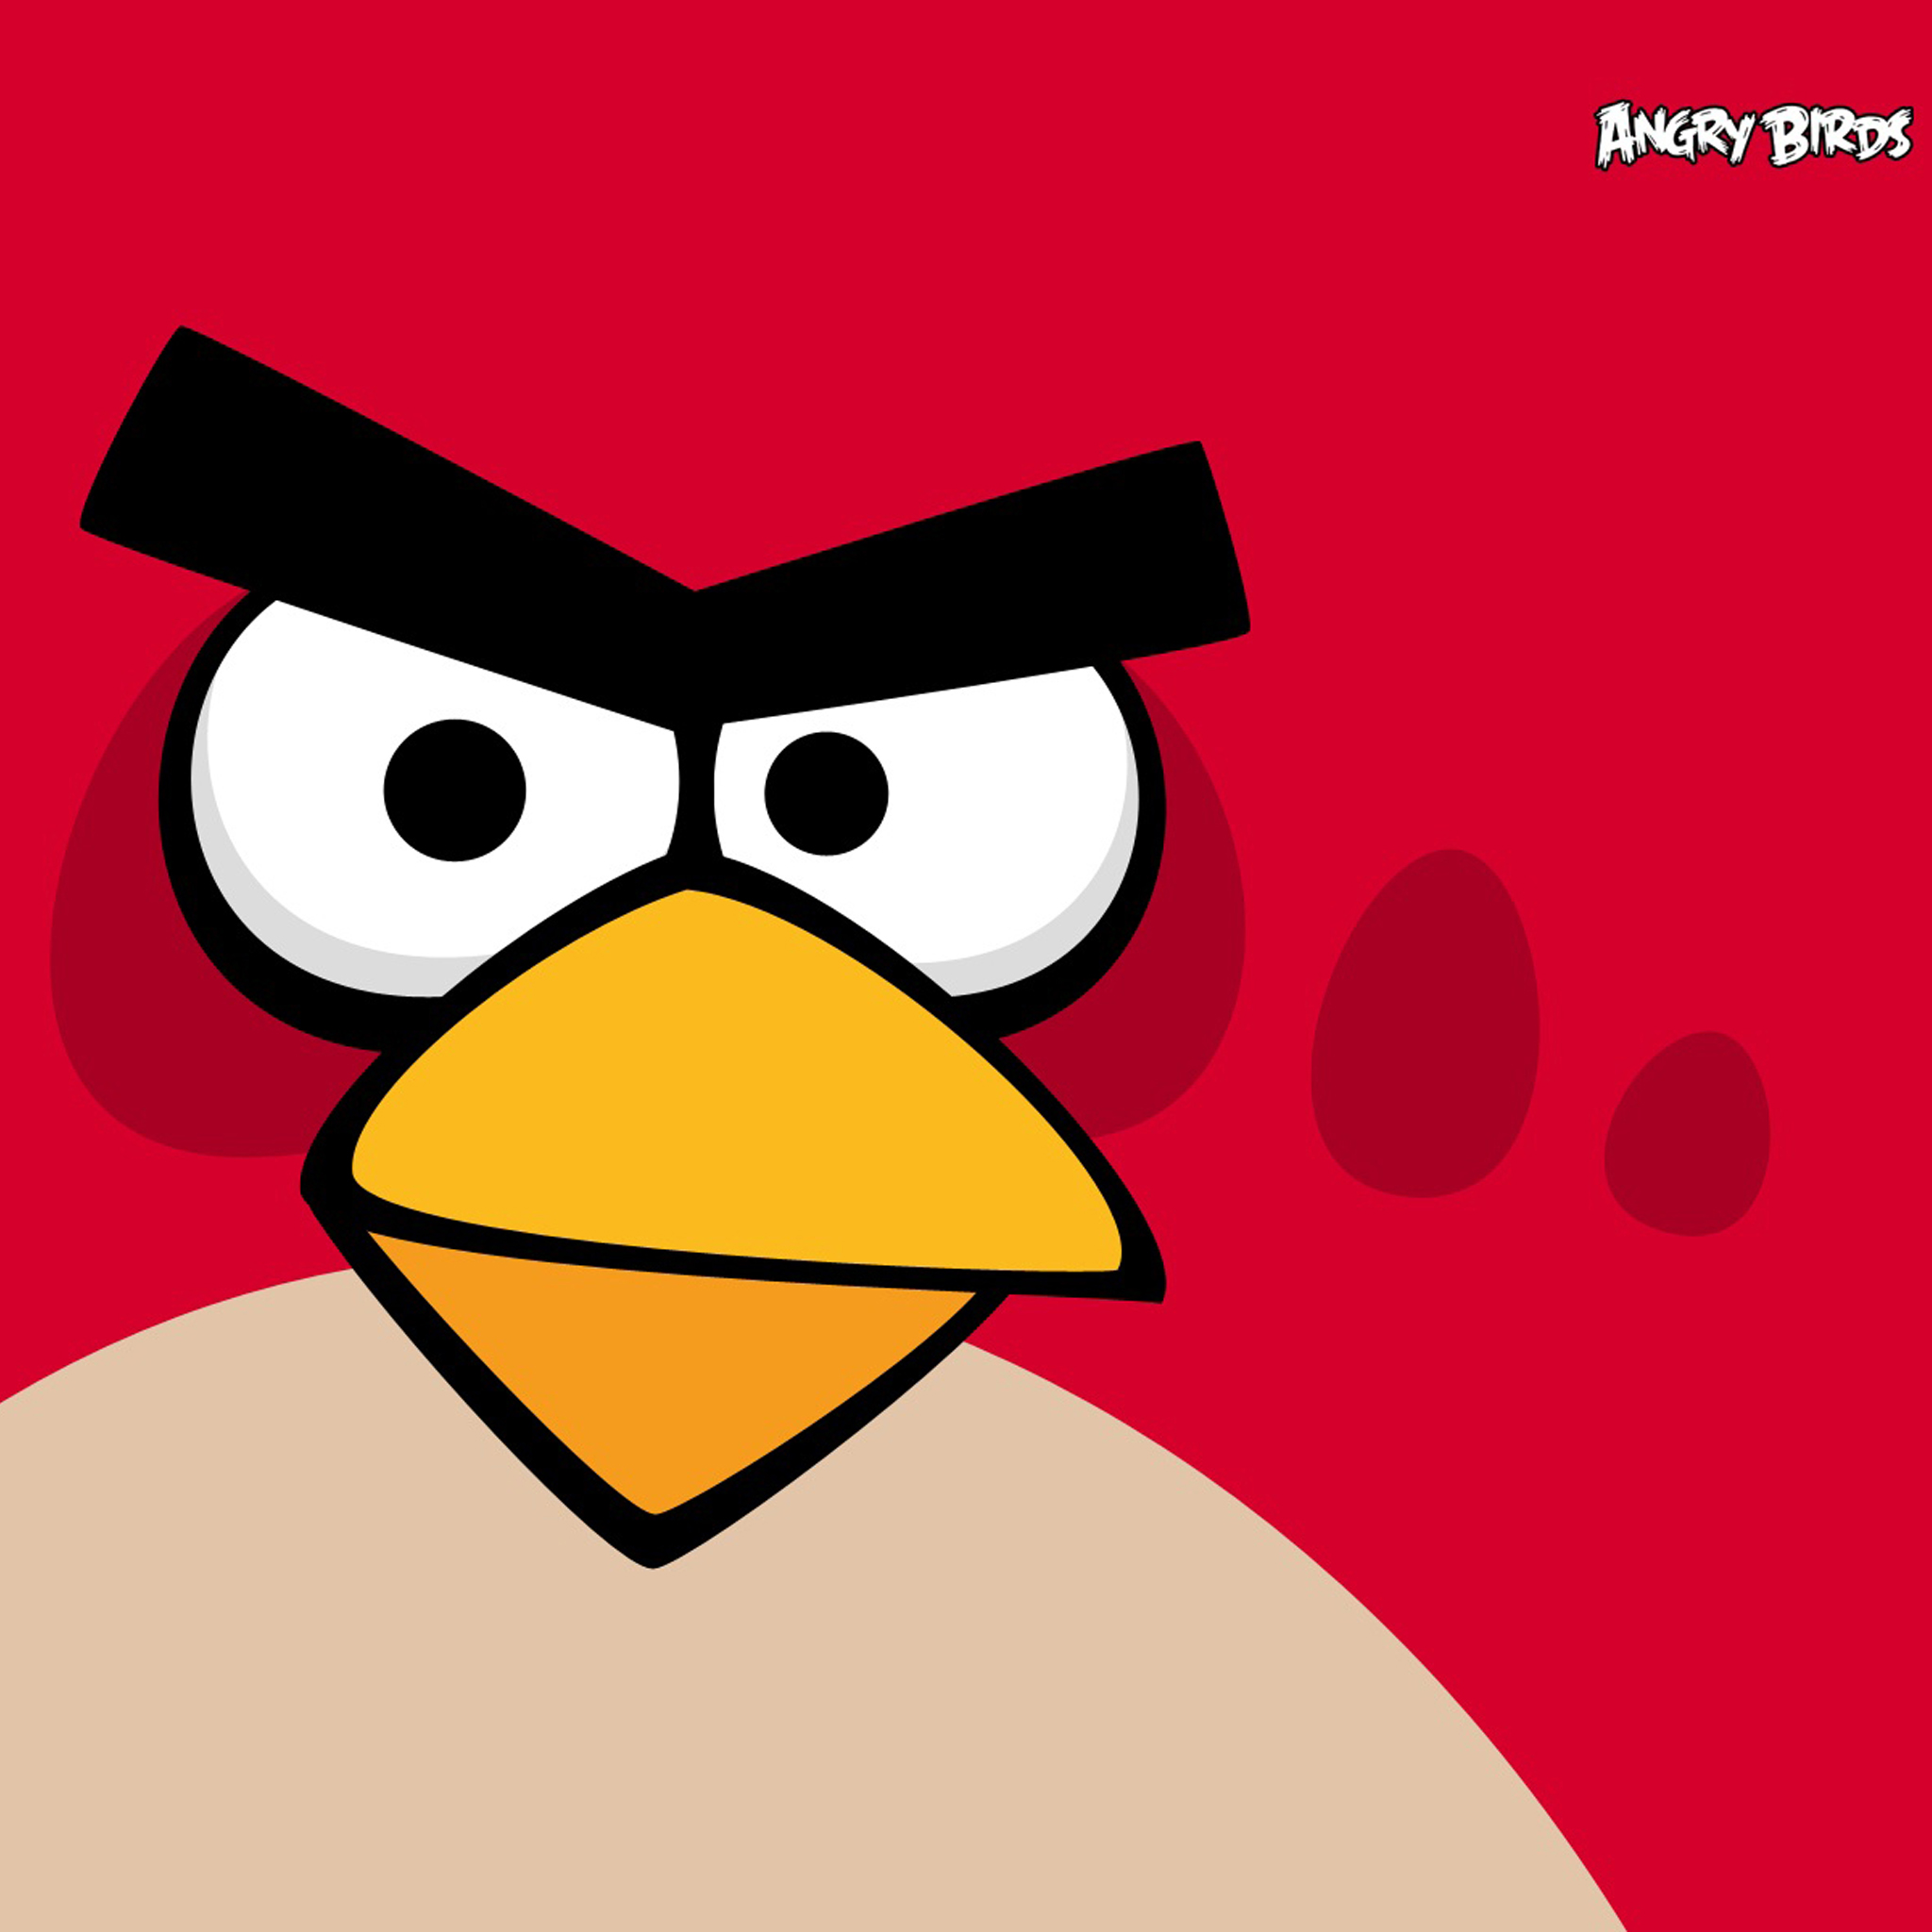 Angry Birds Wallpaper For Ipad 48x48 Pixel Wallpaper 9754 Wallpaperdev Ipad タブレット壁紙ギャラリー